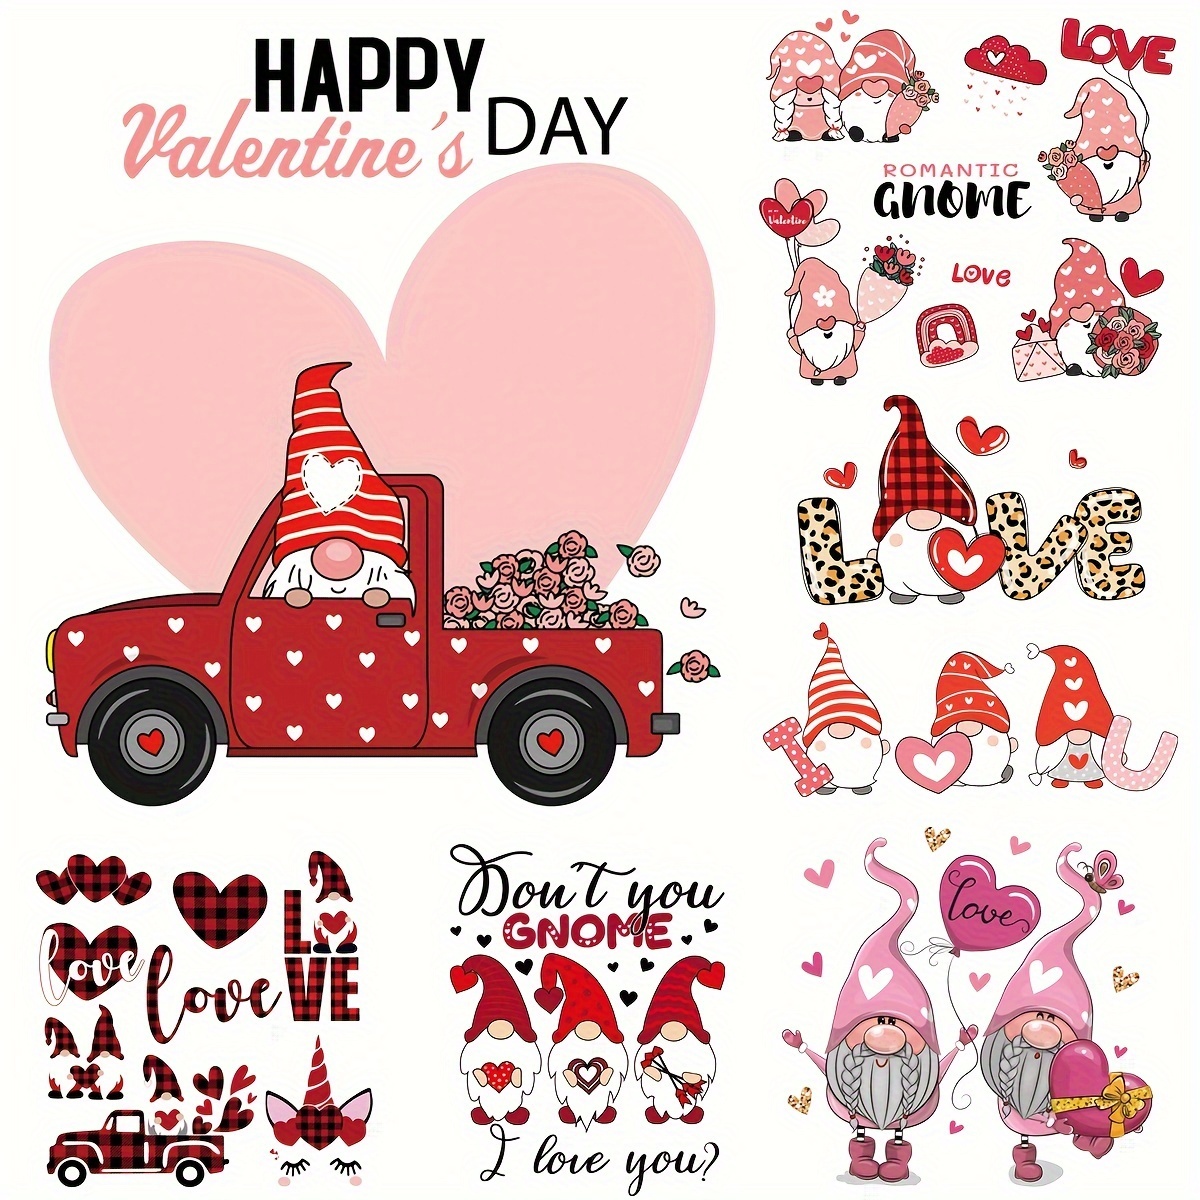 Valentines Heart Iron On Patches Heat Transfer Vinyls Stickers 8 Sheets  Happy Valentine's Day Love Iron on Washable Cute Decoration for Clothing